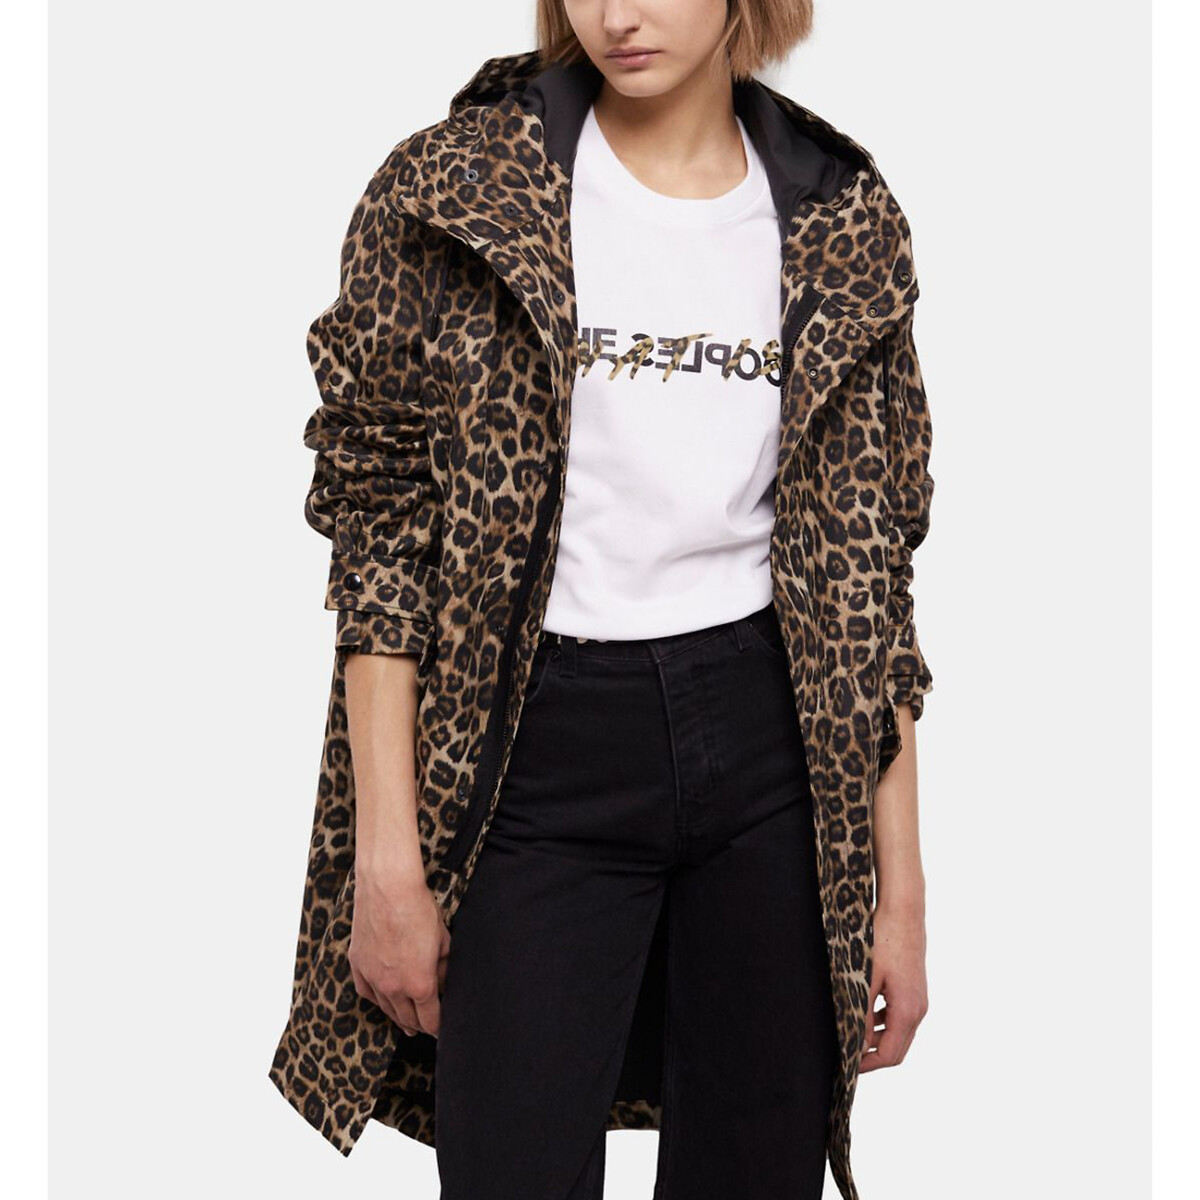 Leopard Print Hooded Parka with Zip Fastening, Mid-Length